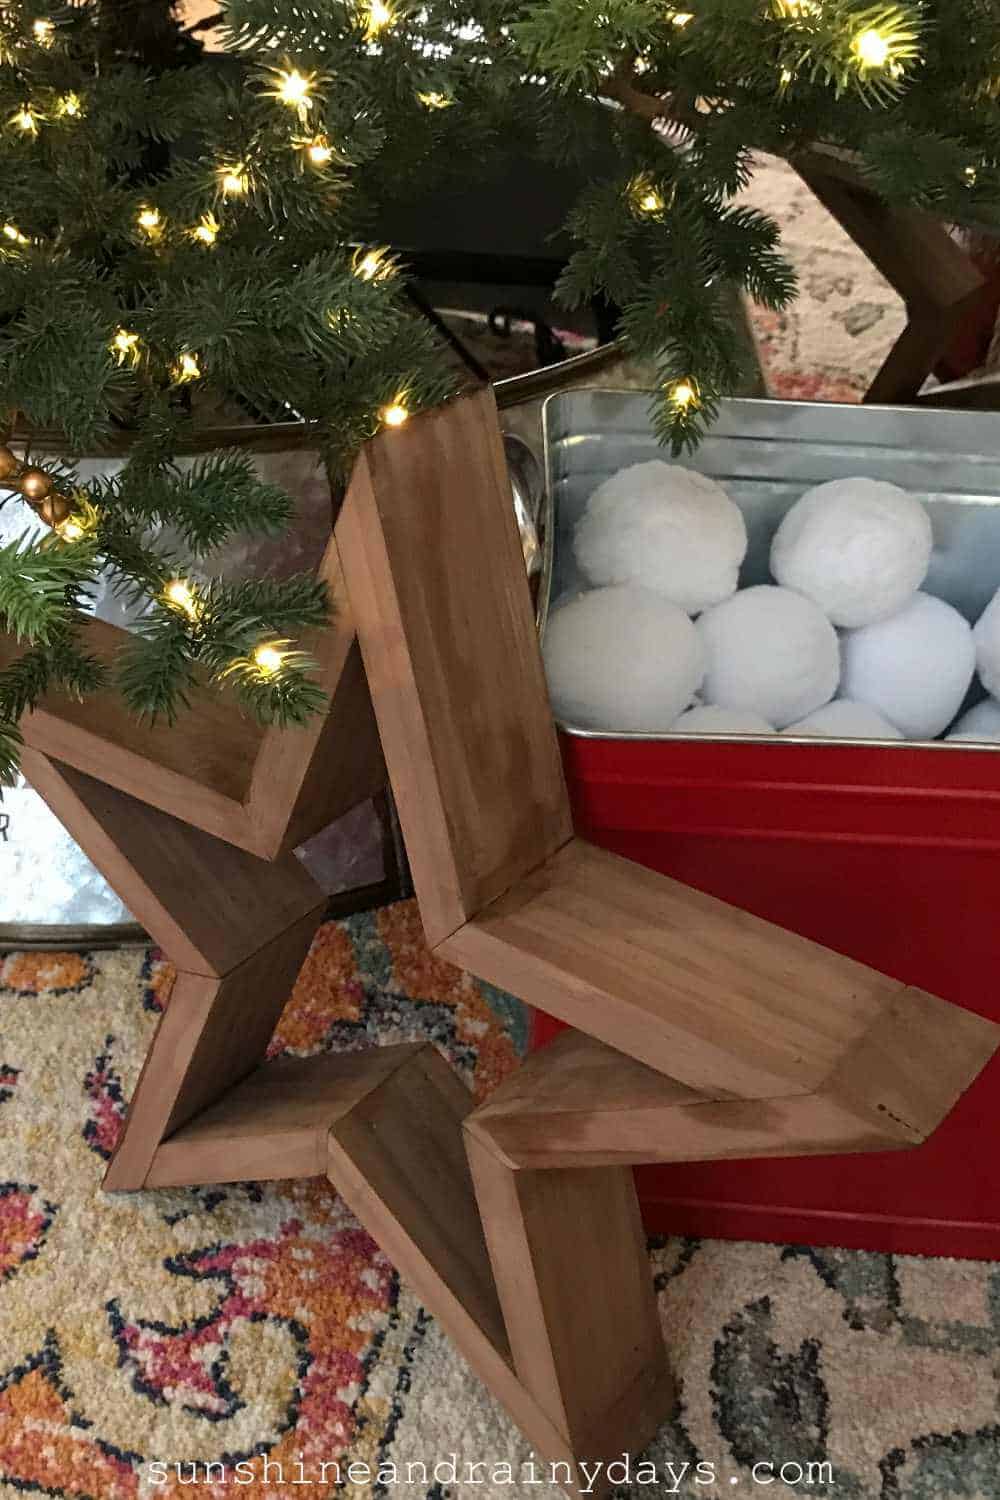 How to Make a Simple Wooden Christmas Star